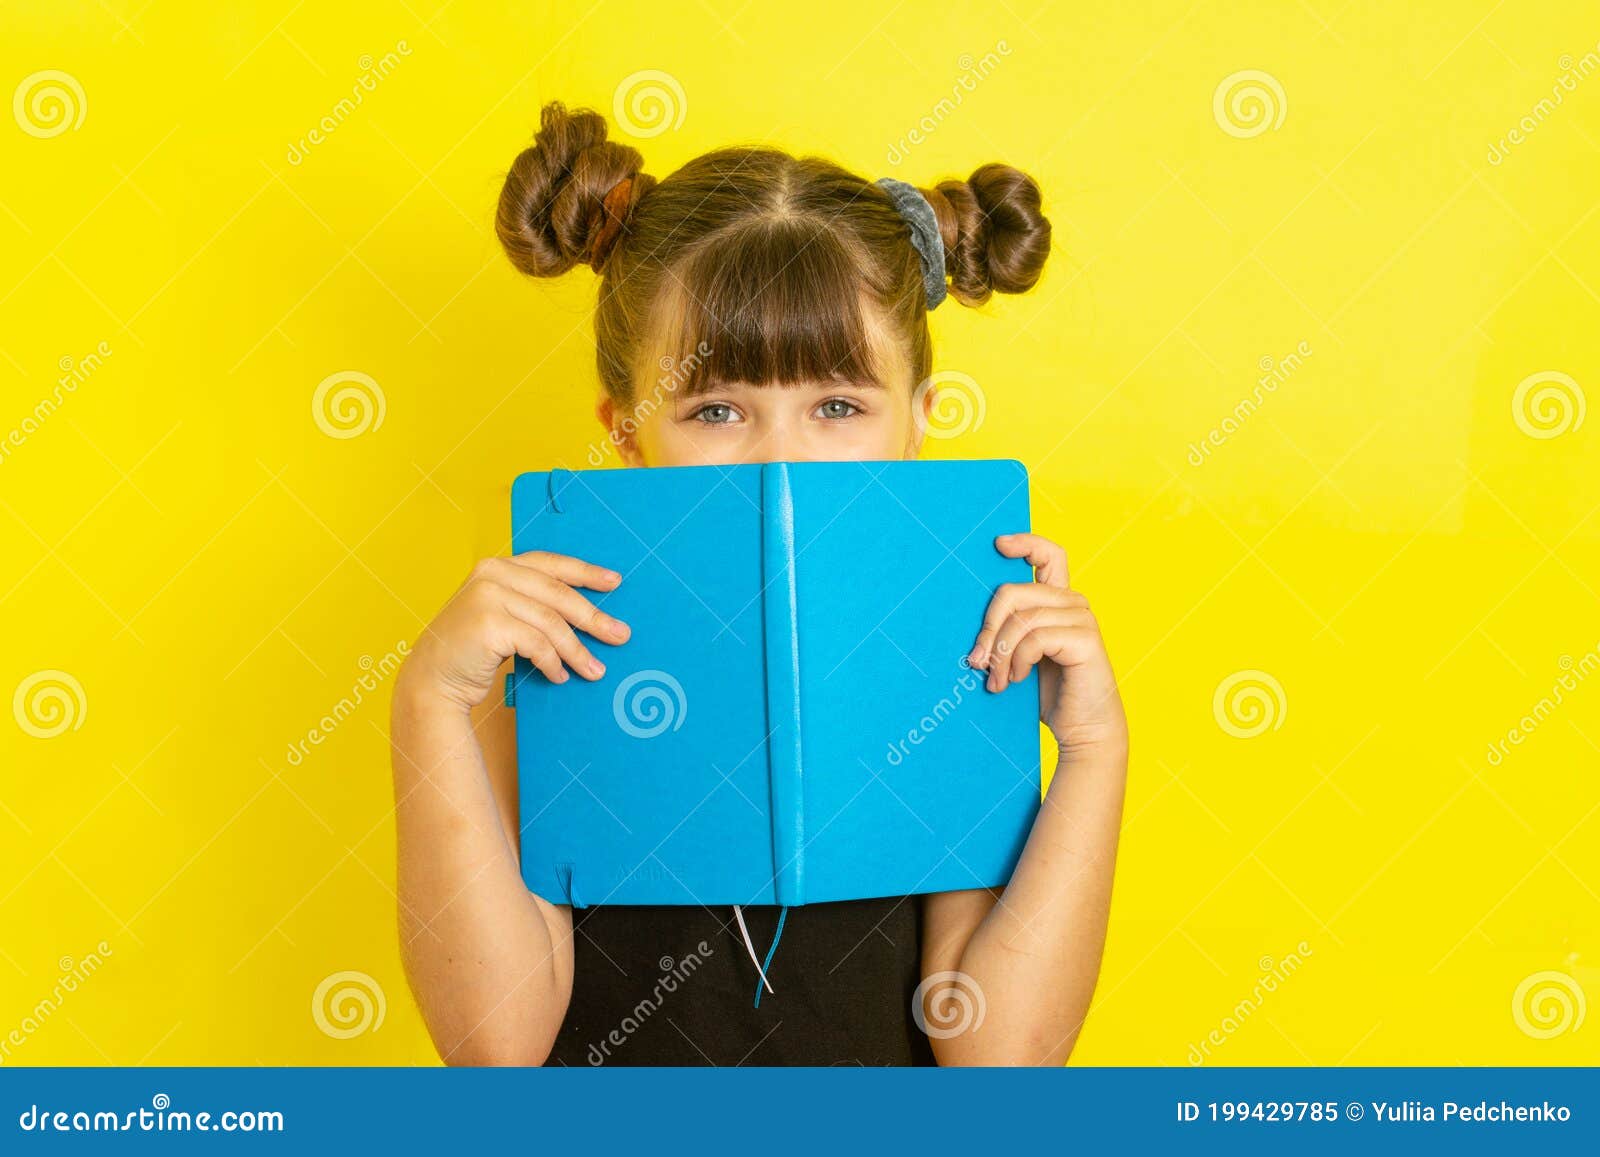 back to school background with kid. concept of education and reading. industrious child. space for advertisement text.